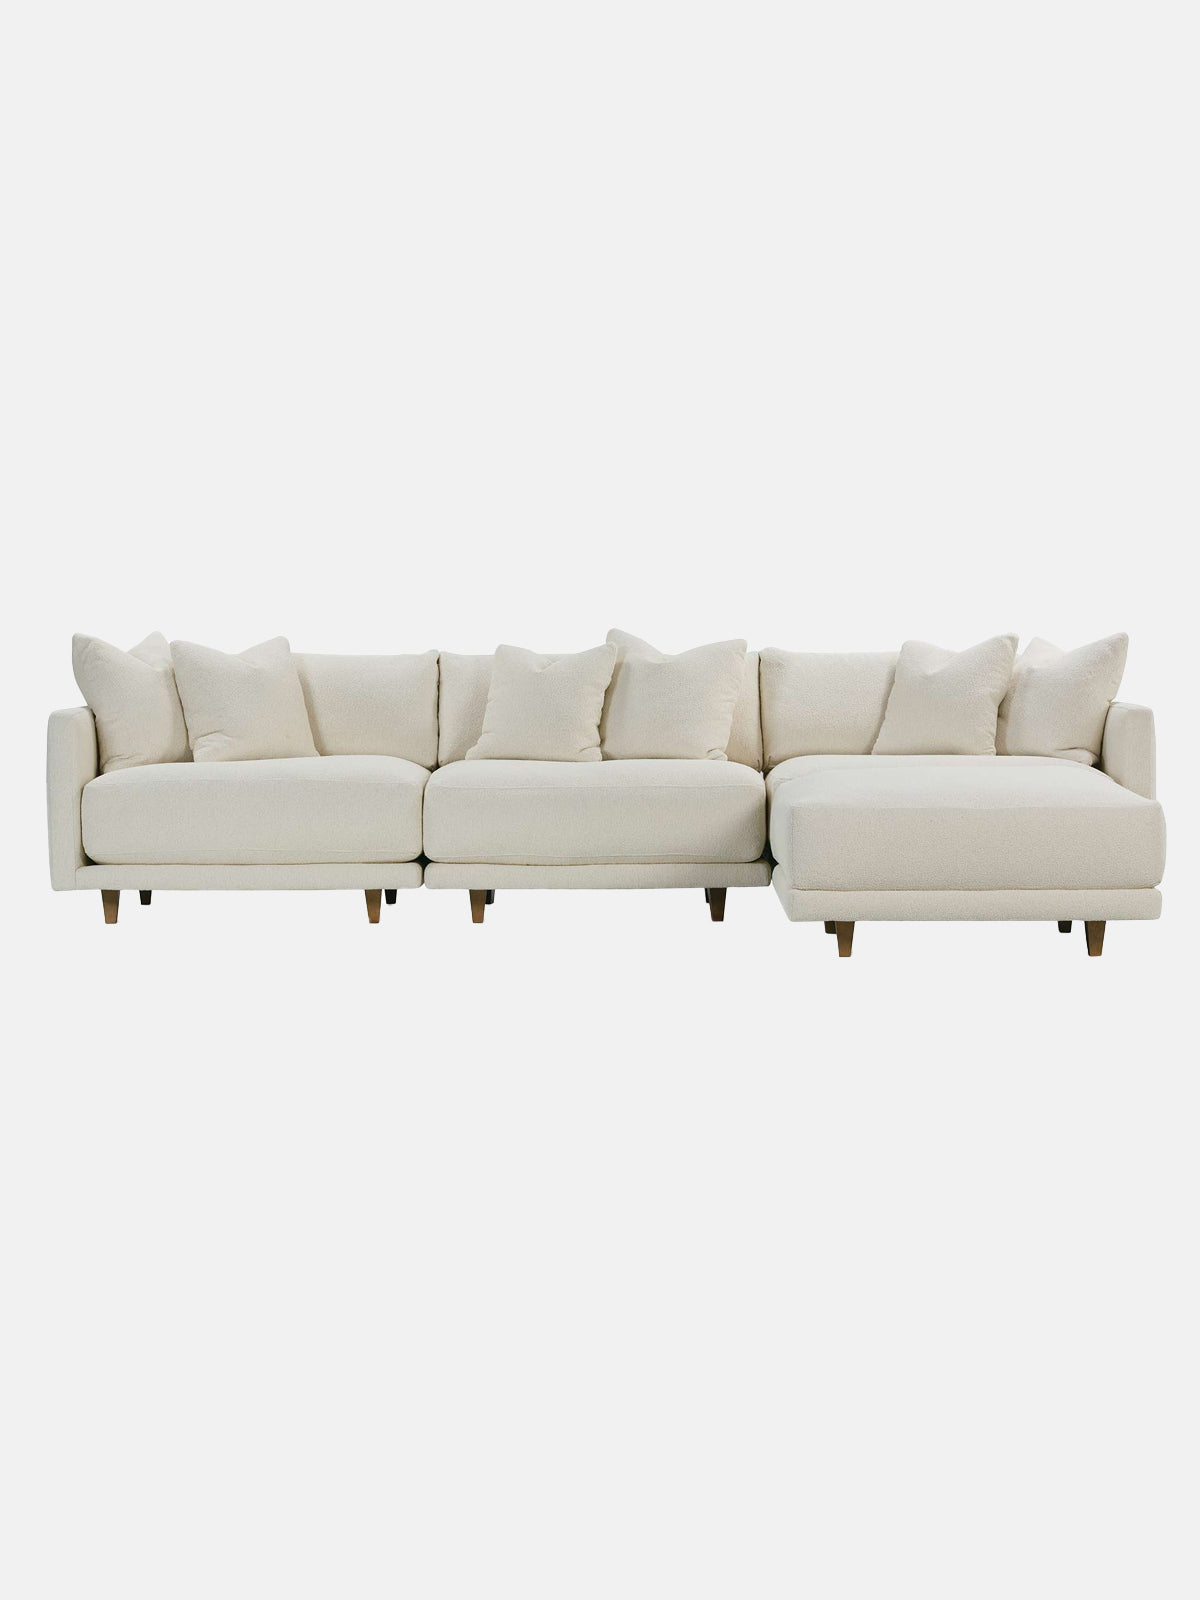 The Neval 5 Piece Sectional